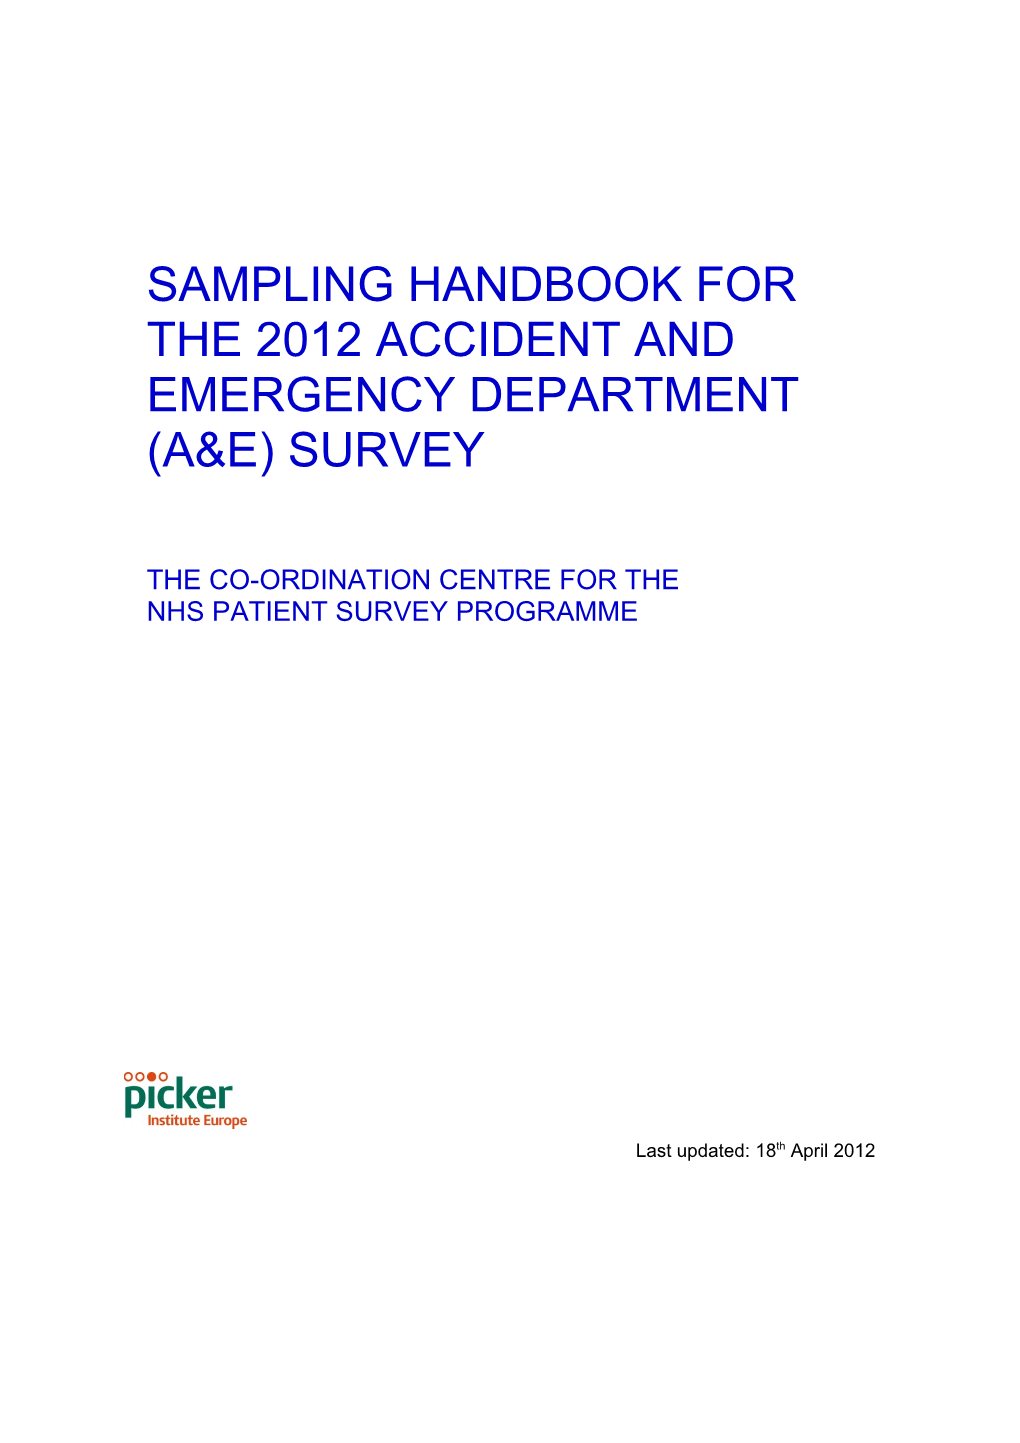 Sampling Handbook for the 2012 Accident and Emergency Department (A&E) Survey